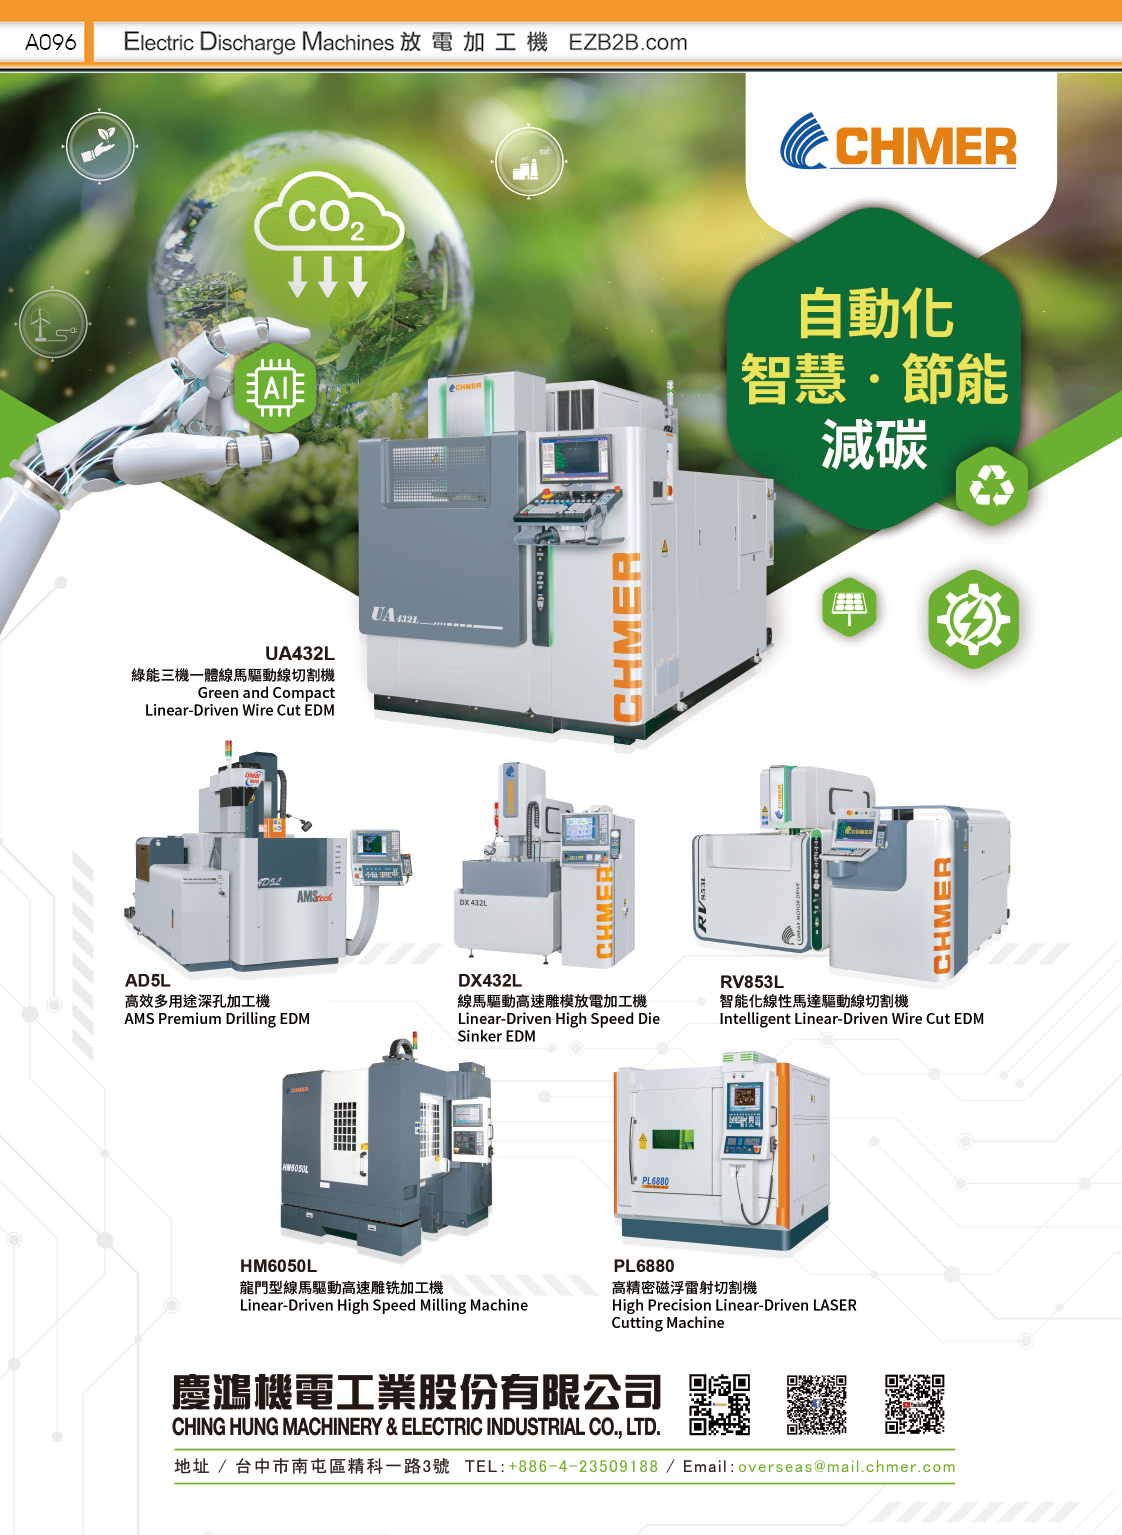 CHING-HUNG MACHINERY & ELECTRIC INDUSTRIAL CO., LTD.